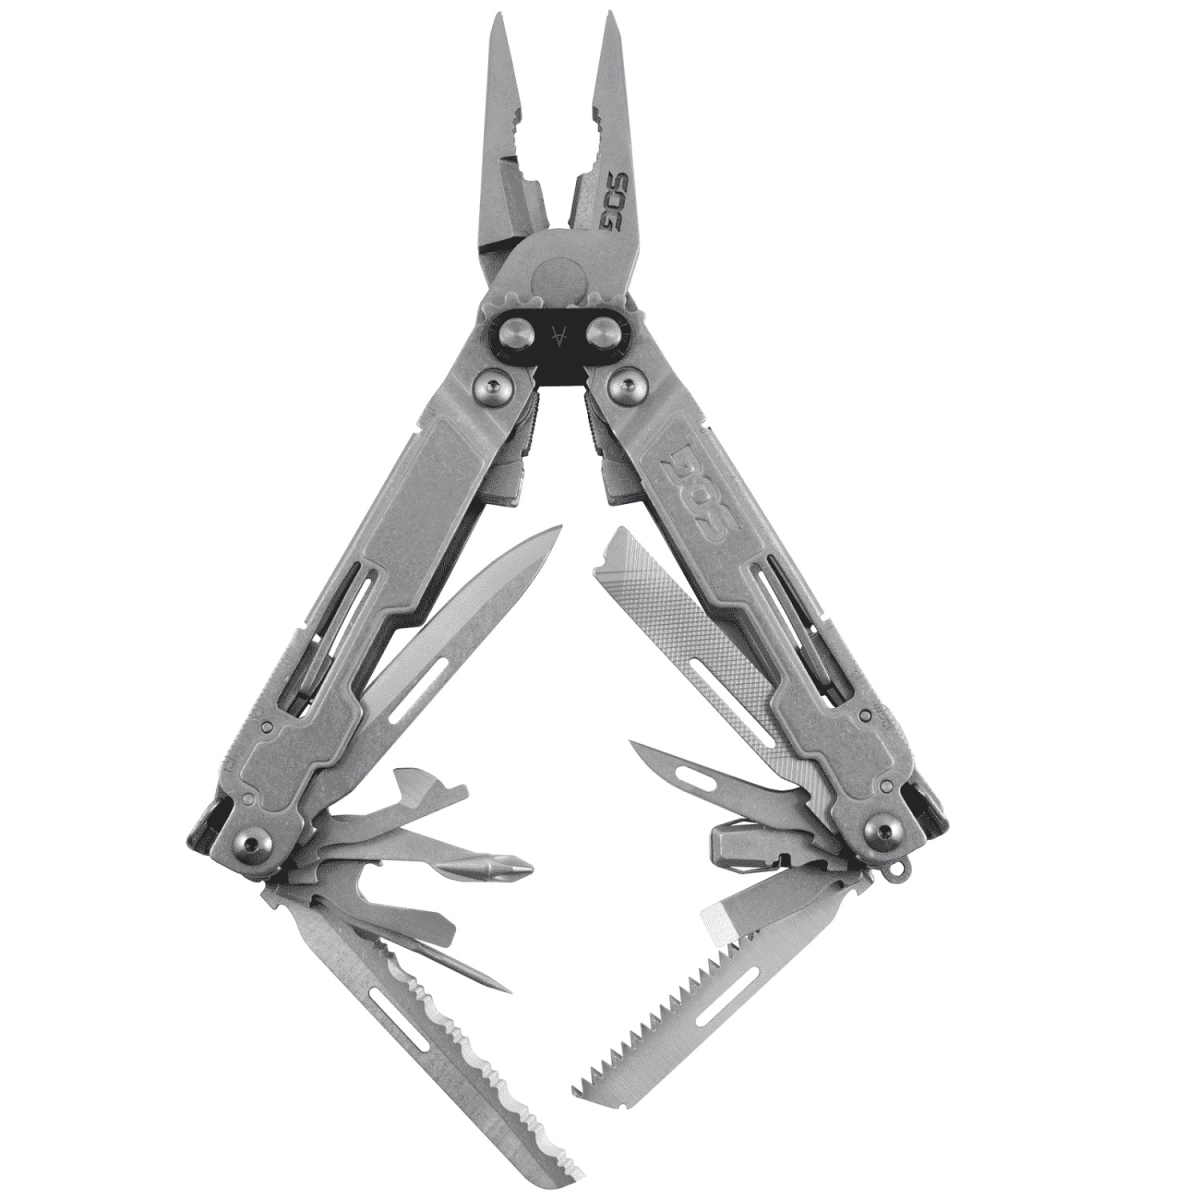 4016288 Poweraccess Deluxe Multi-tool With 21 Tools